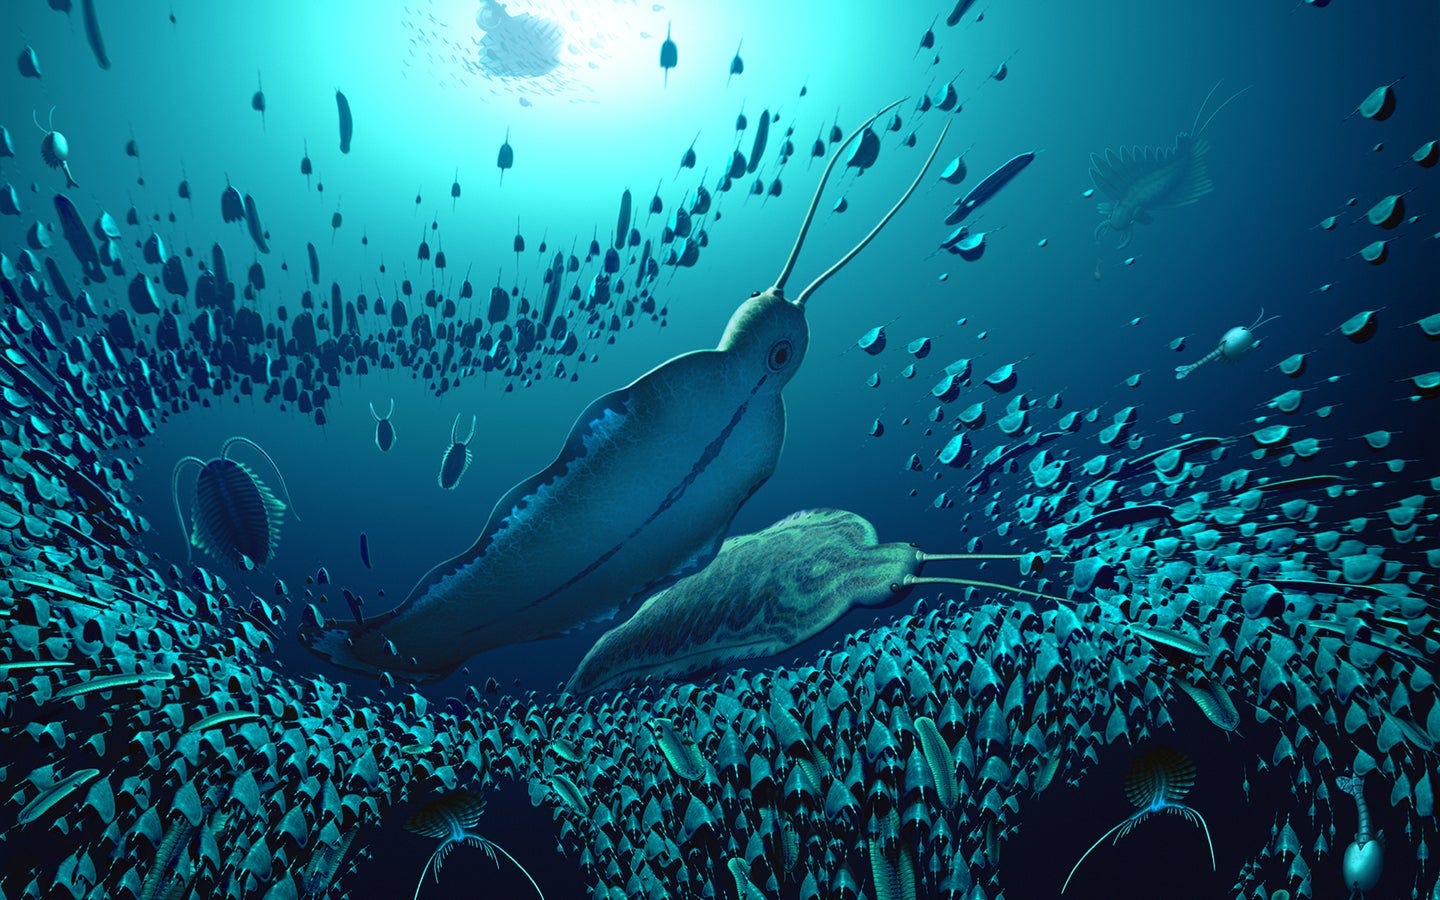 An illustration of the pelagic ecosystem and the organisms fossilized in Sirius Passet, revealing how Timorebestia was one of the largest predators in the water column more than 518 million years ago.